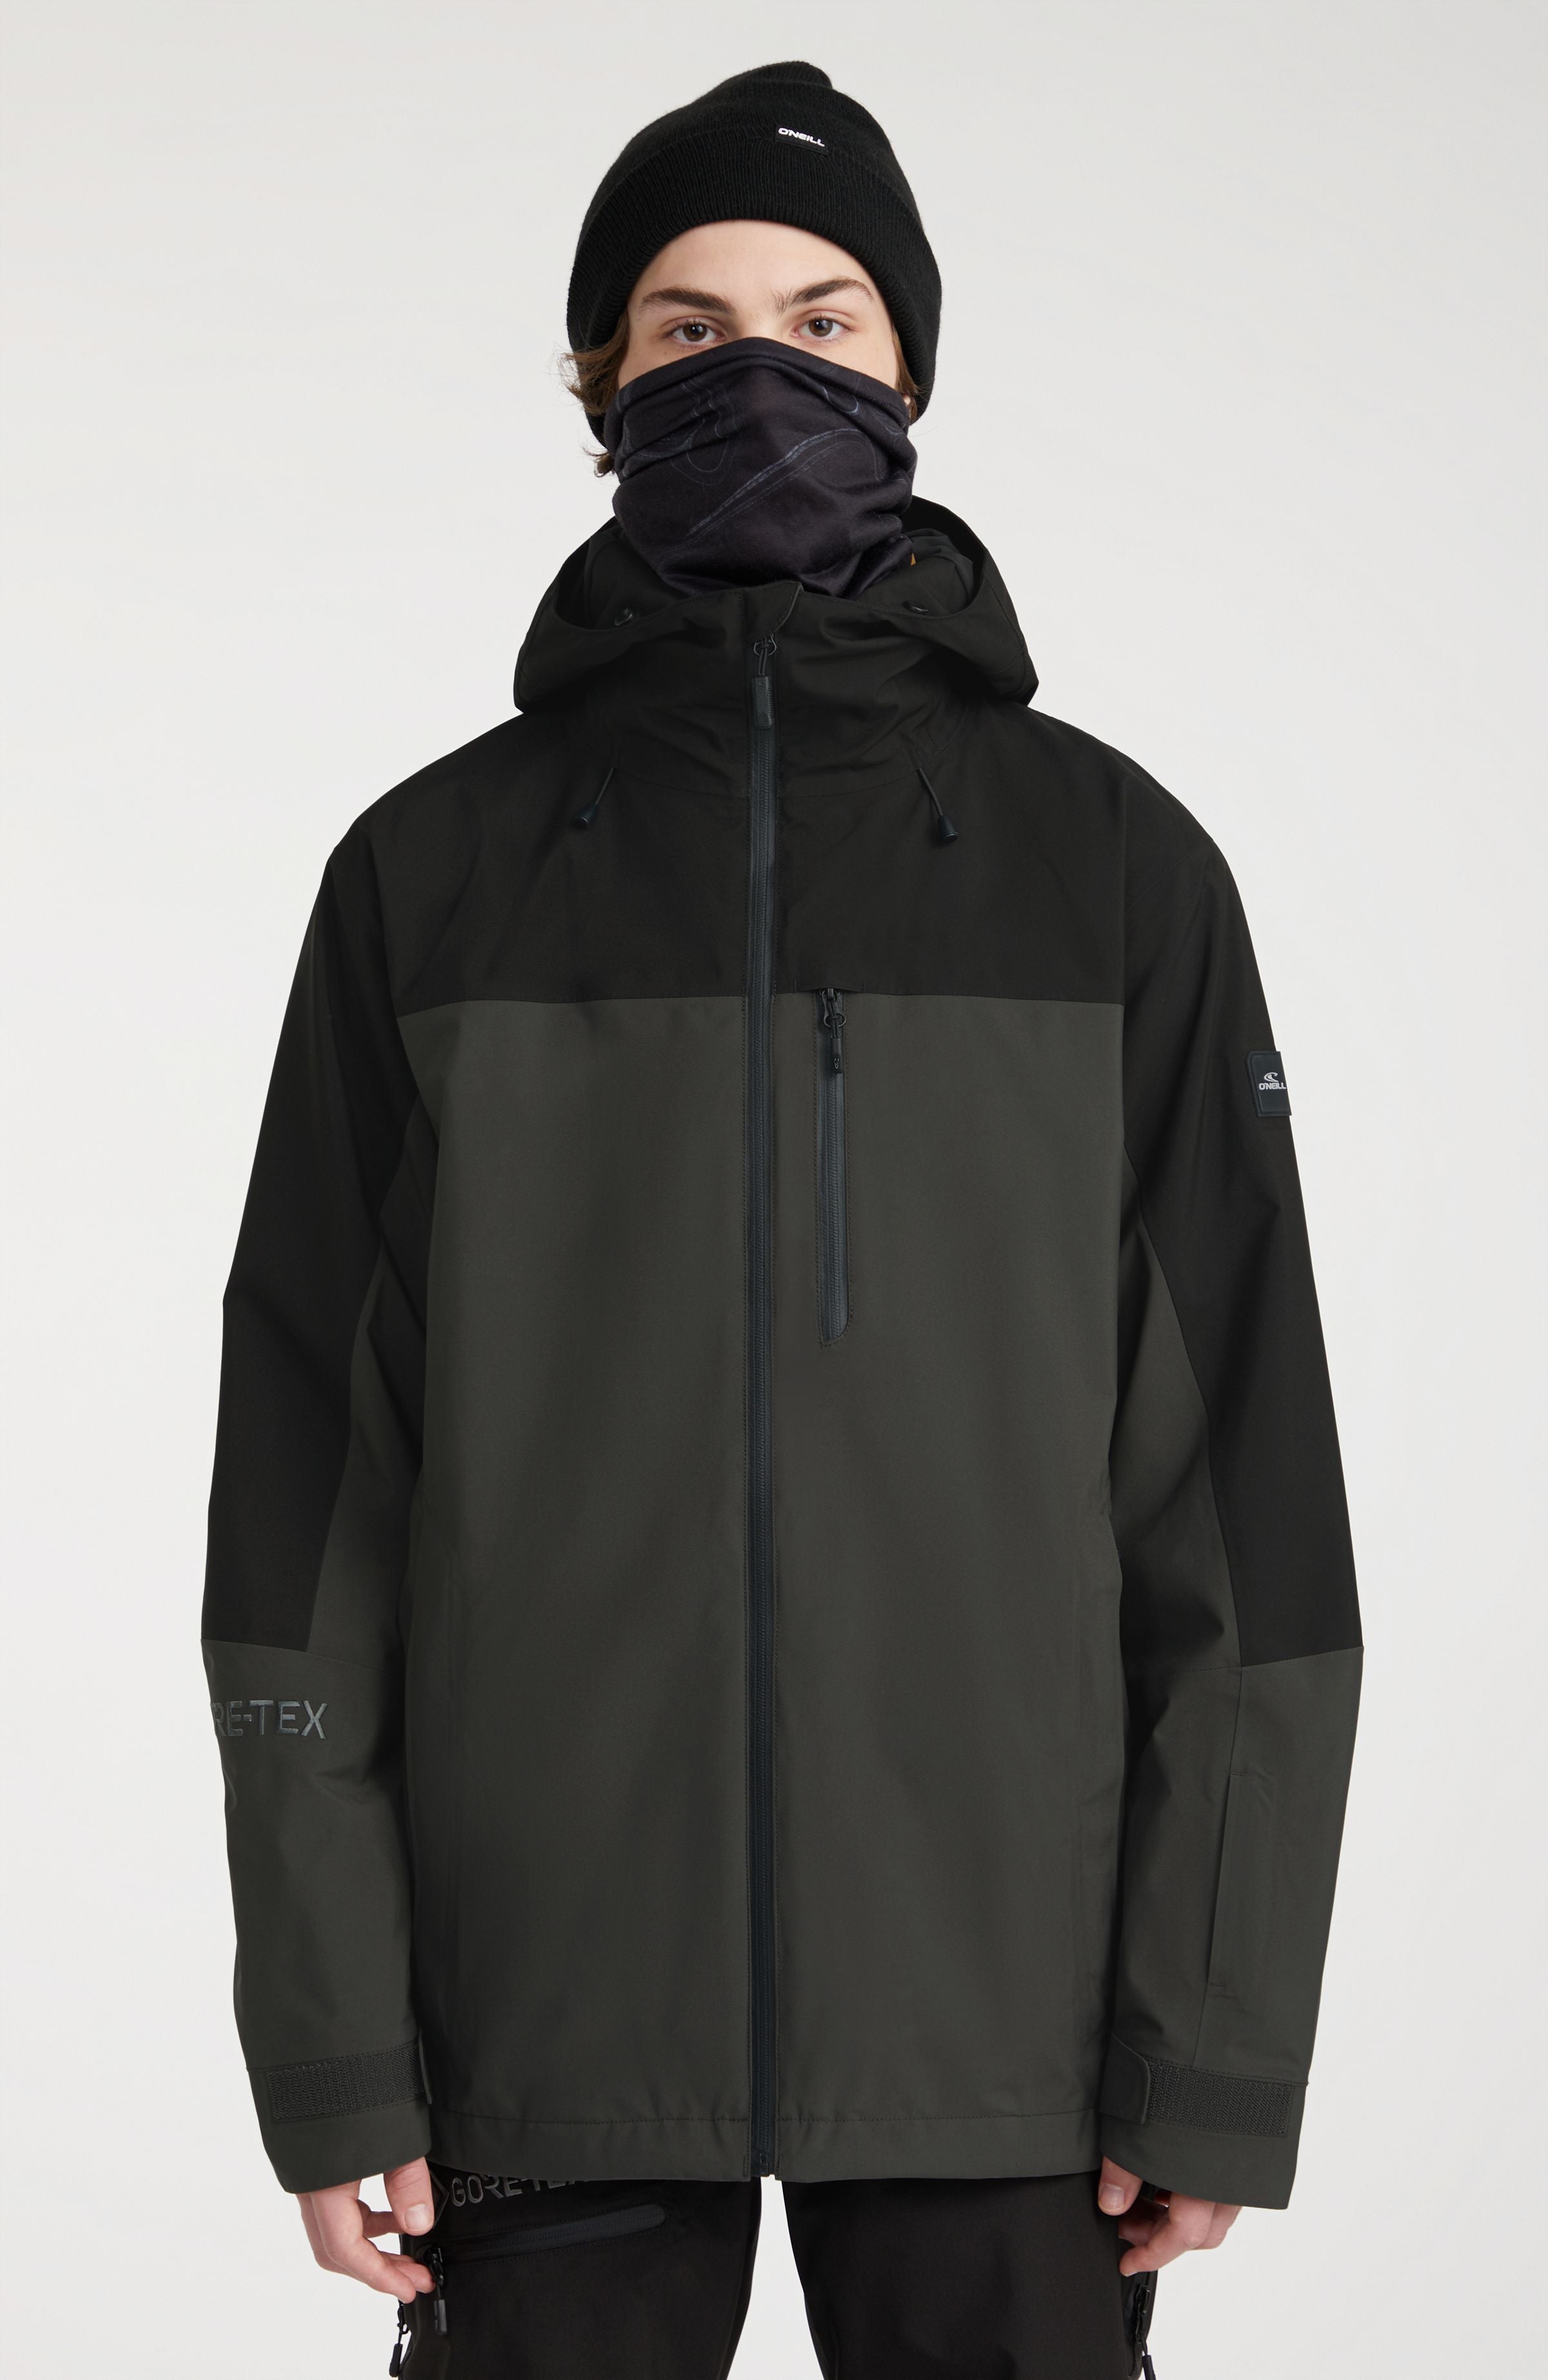 GORE-TEX Psycho Snow Jacket | Black Out Colour Block – O'Neill